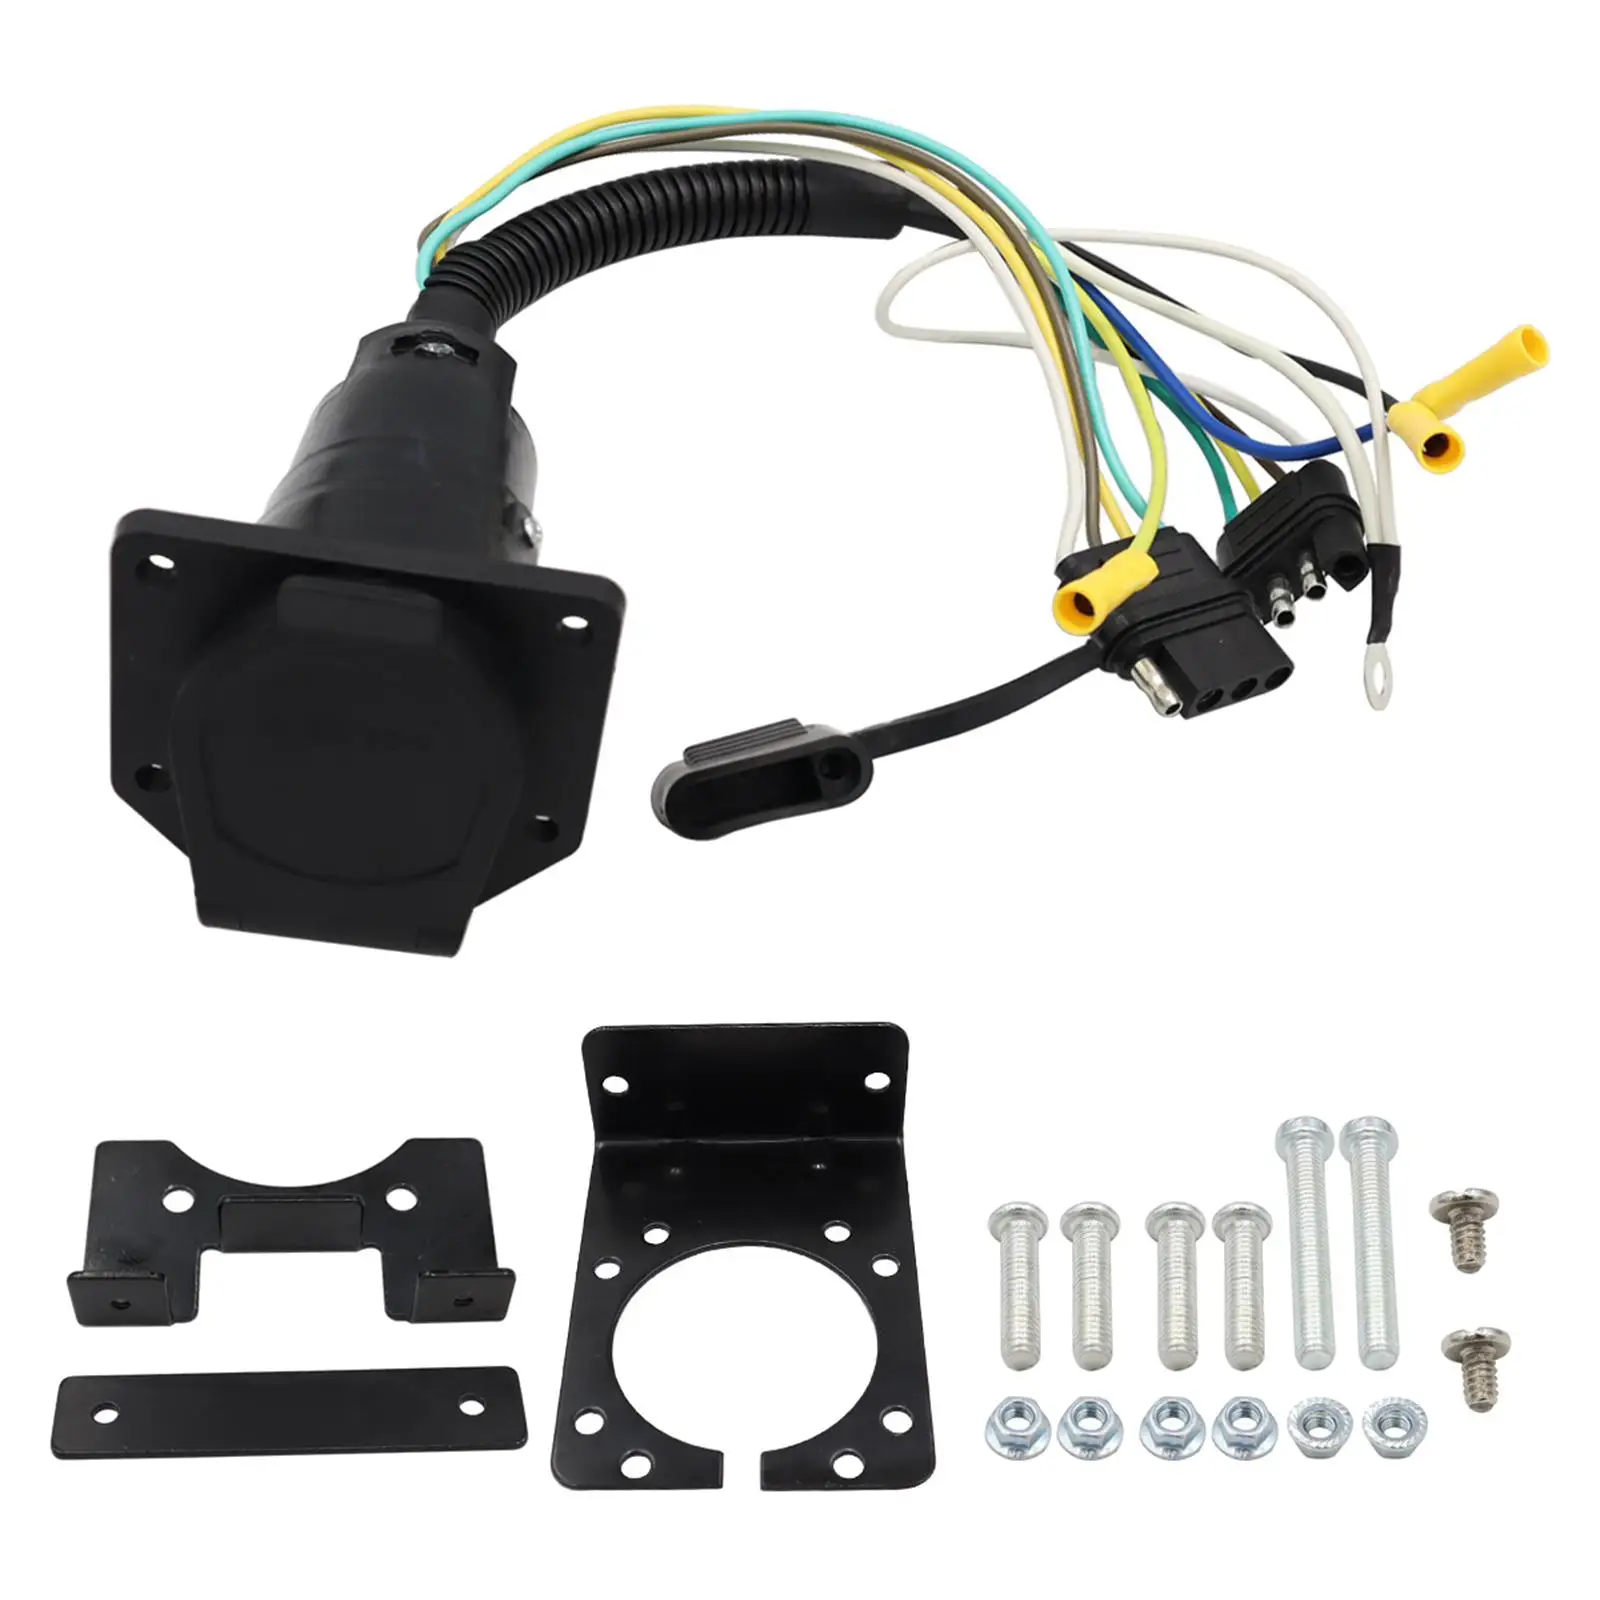 Trailer Wiring Adapter Accessories Easy Installation for Trailer Camper